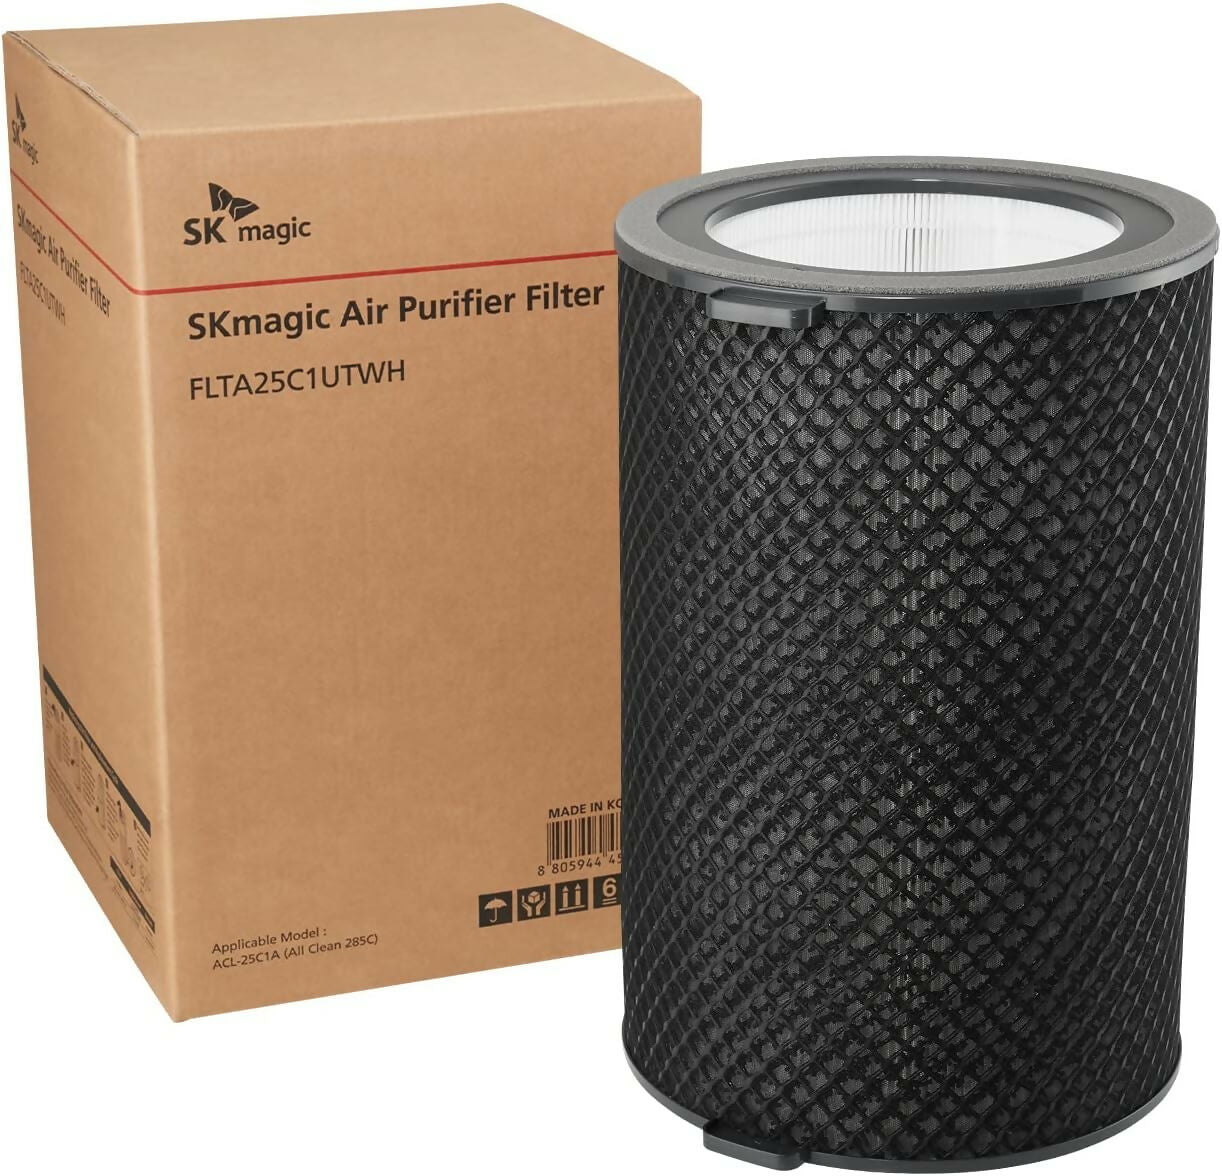 Genuine All-in-one Care Replacement Filter, Fits All Clean 285C